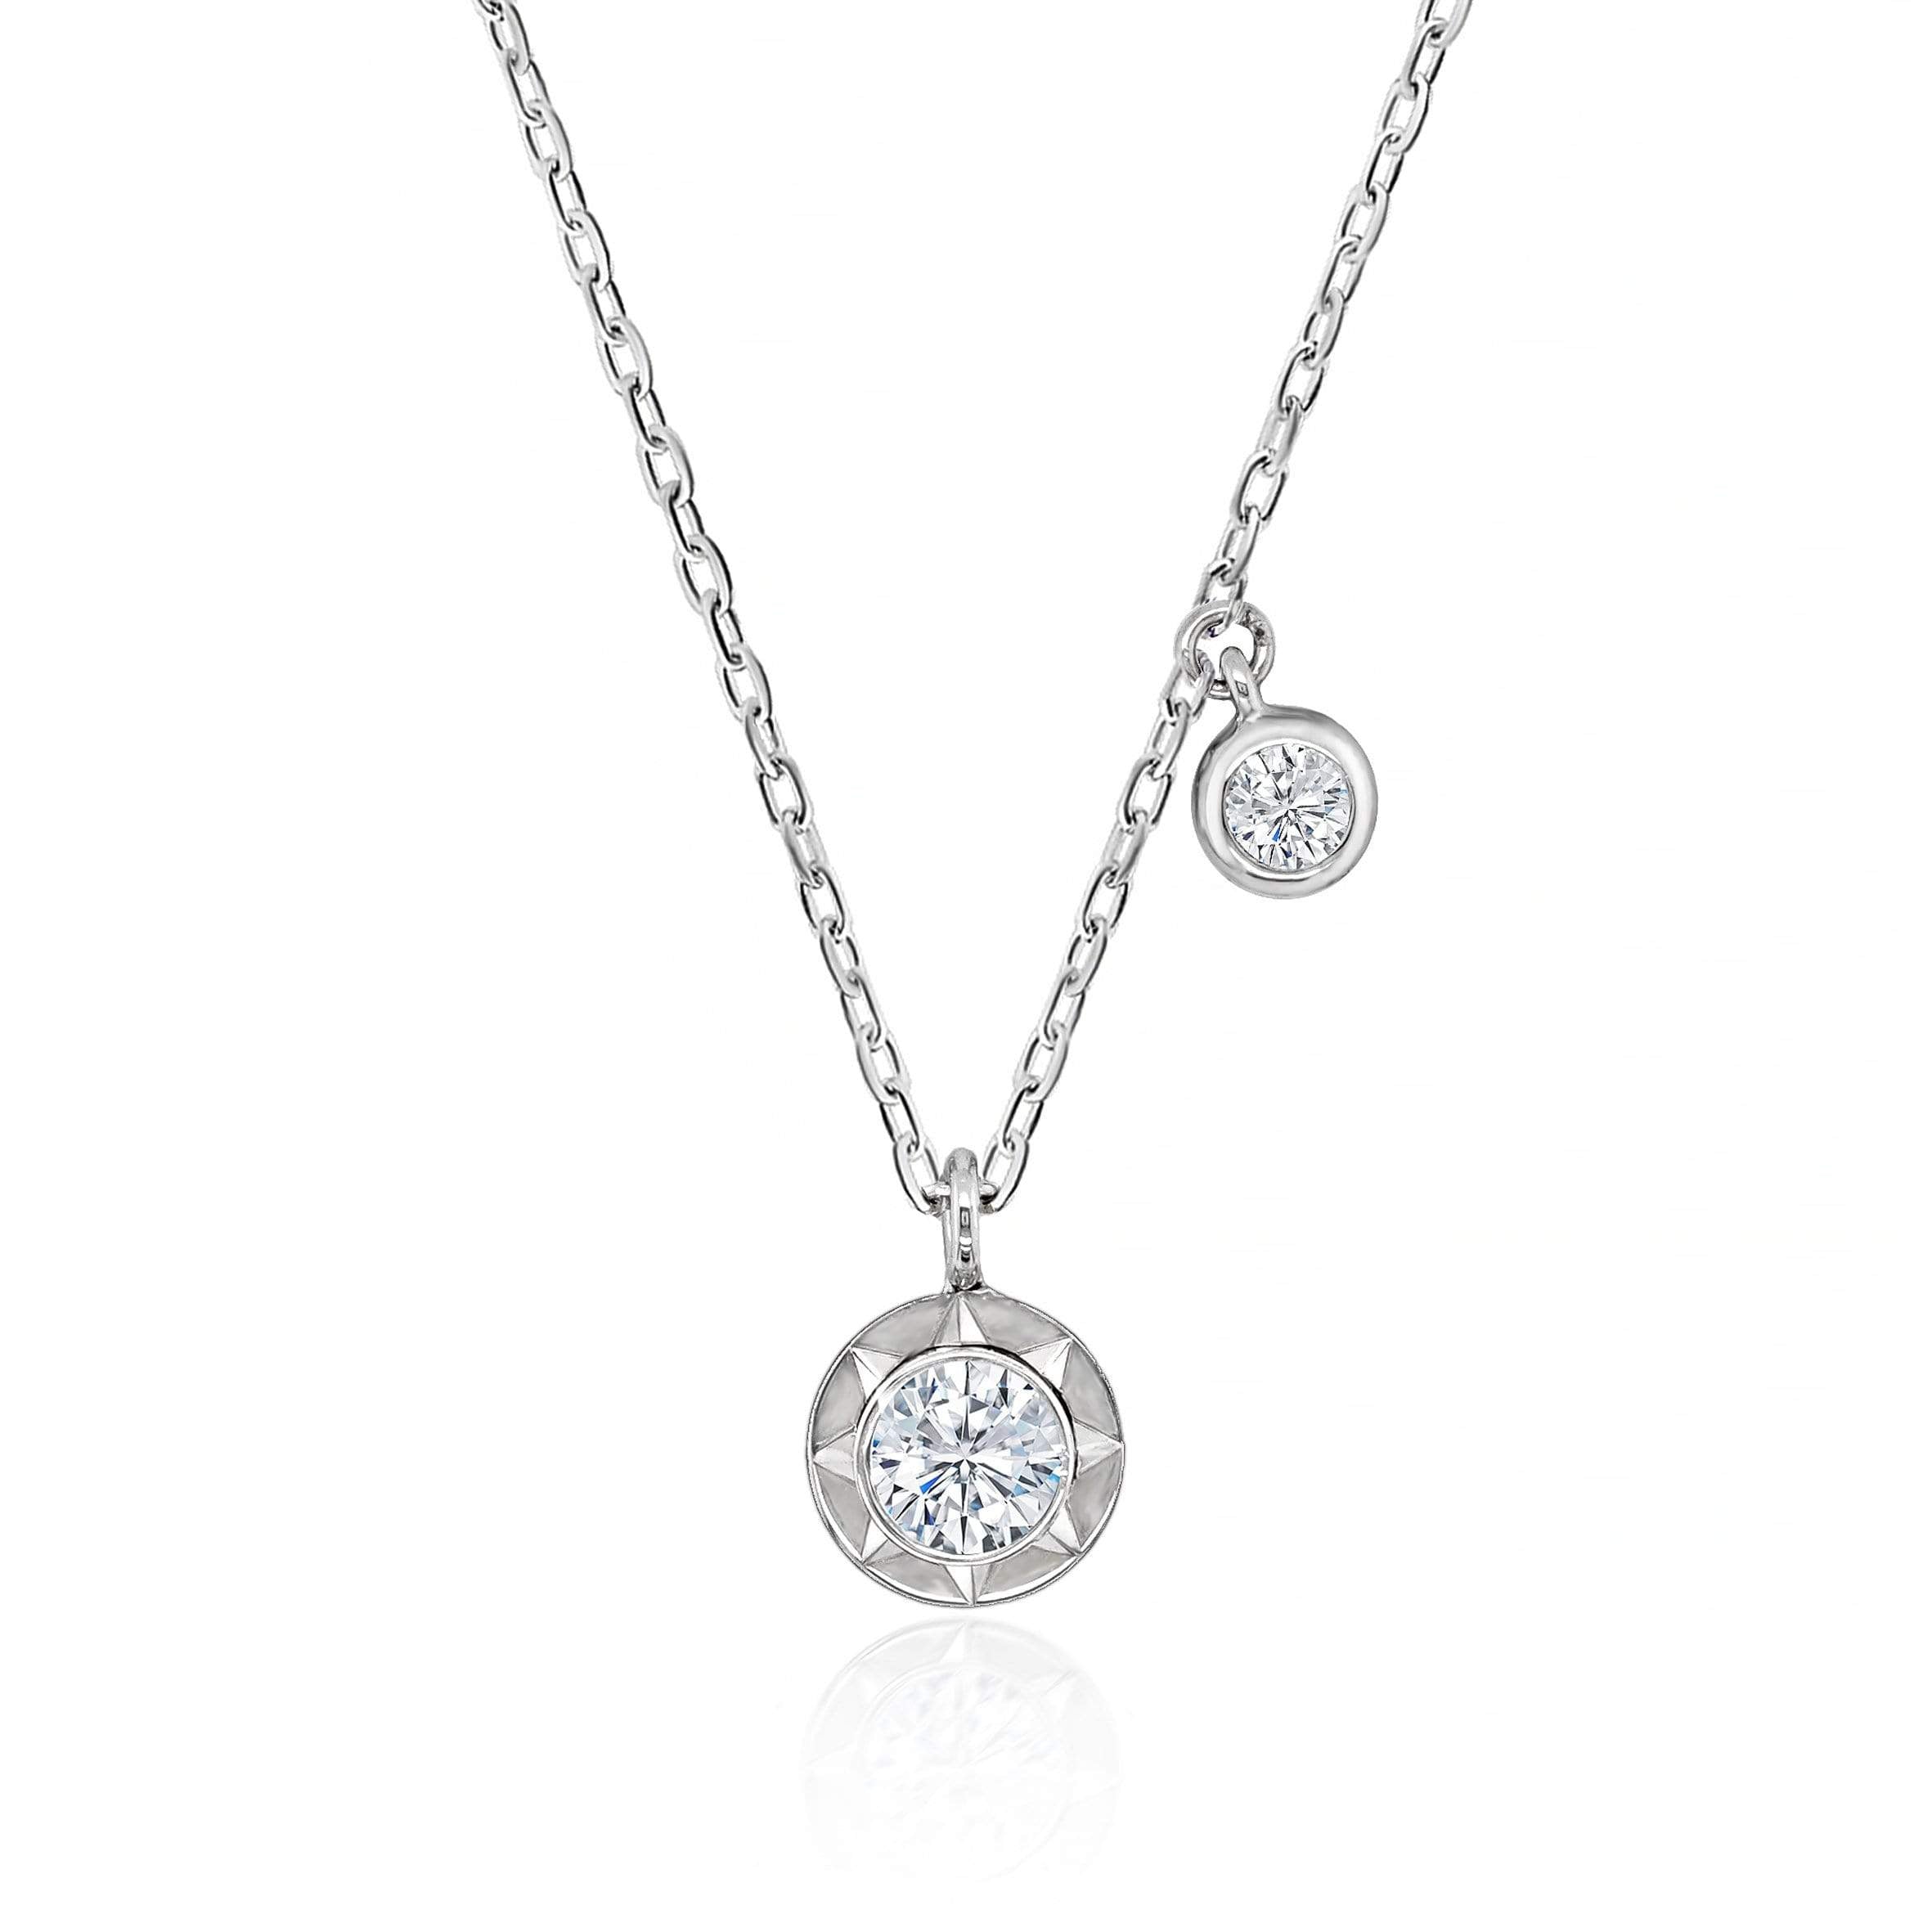 LynoraJewellery BRIGHTSPARK  STERLING SILVER NECKLACE